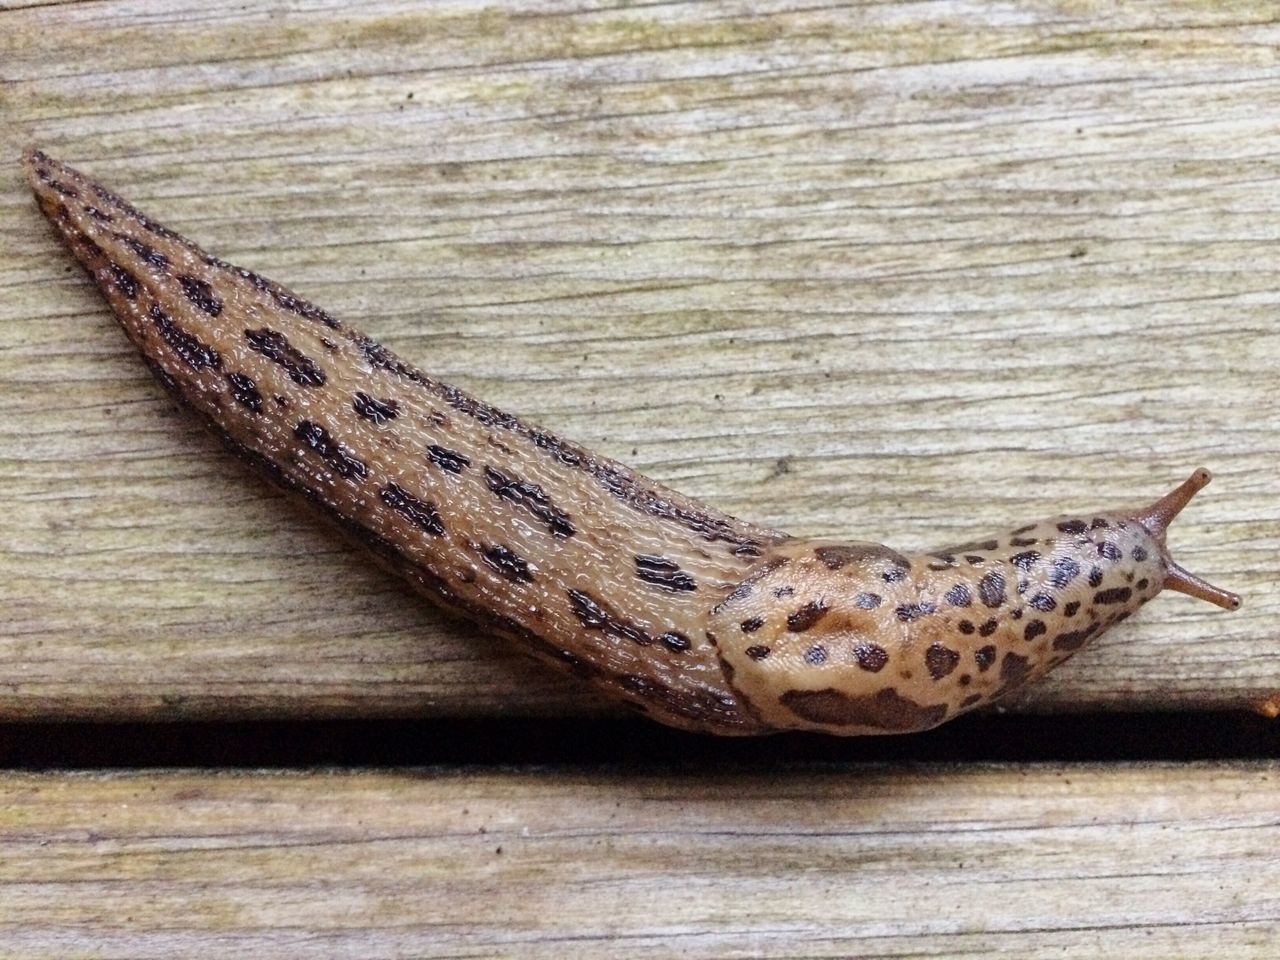 HIGH ANGLE VIEW OF SNAKE ON WOODEN TABLE